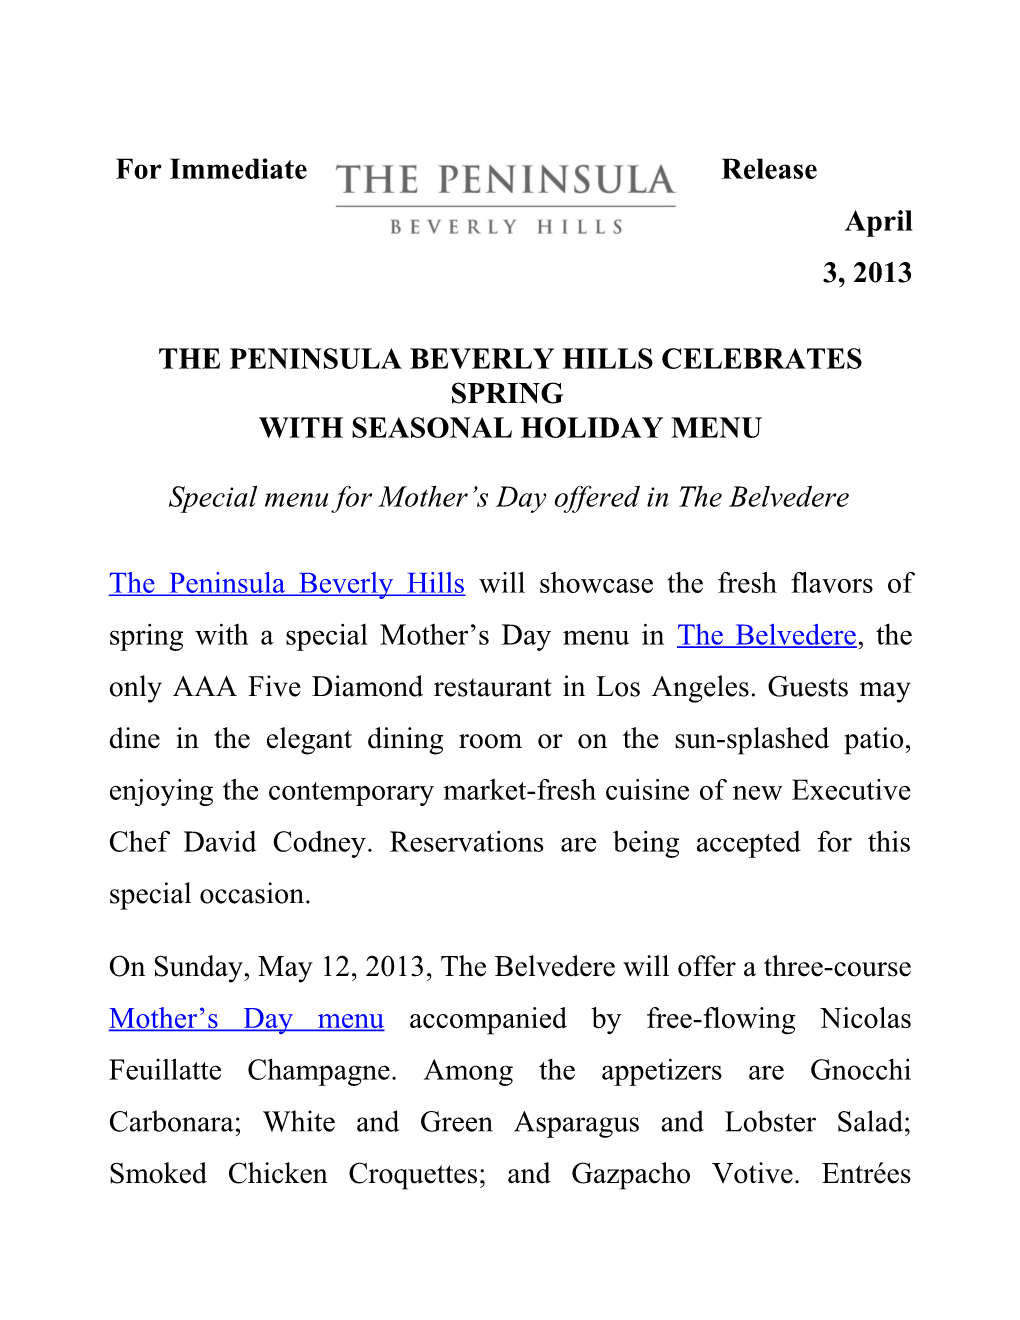 Celebrate Spring at the Peninsula Beverly Hills